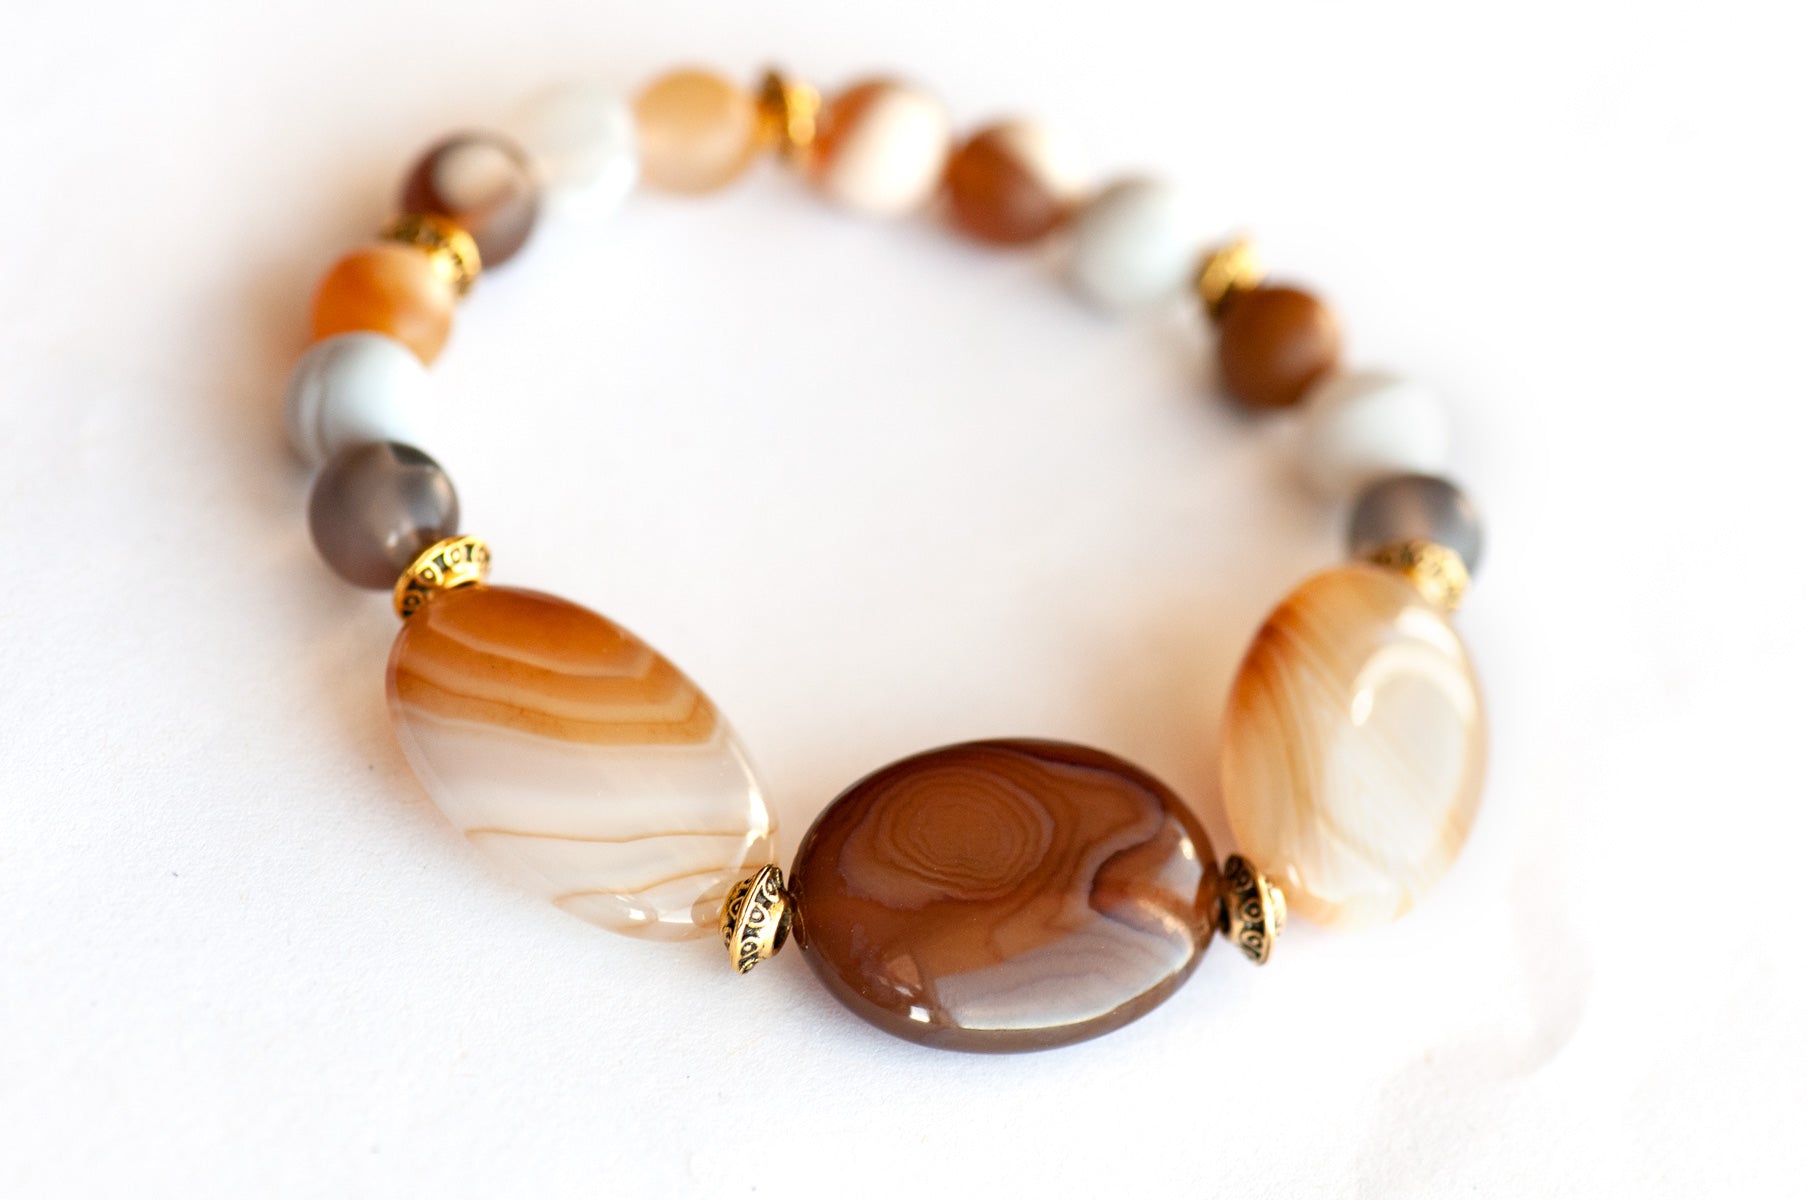 Natural banded Agate bracelet in caramel and brown with gold accents